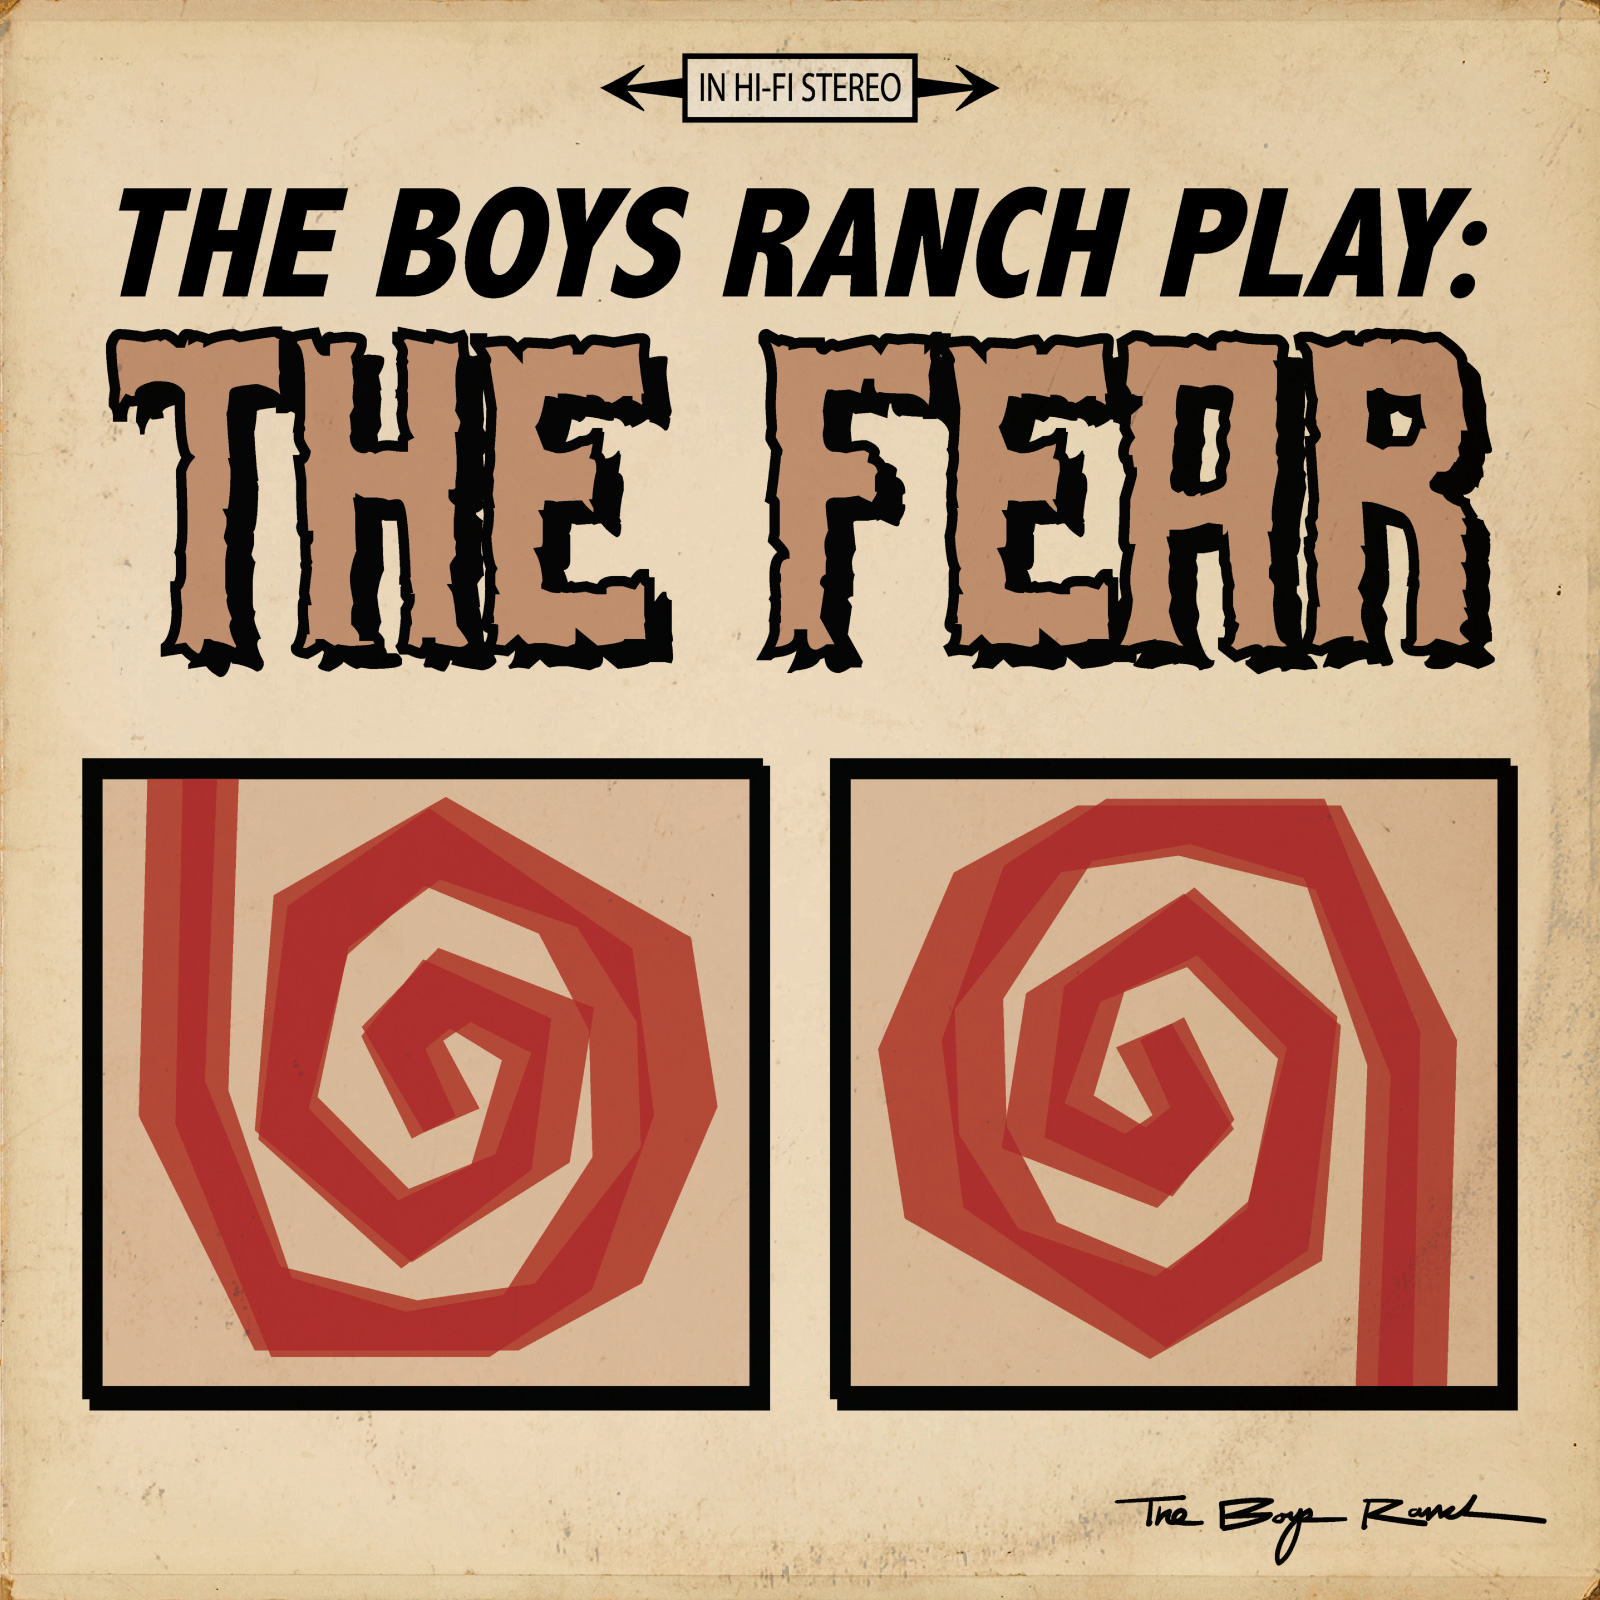 Album artwork - 'The Boys Ranch Play The Fear' with 2 large spirals